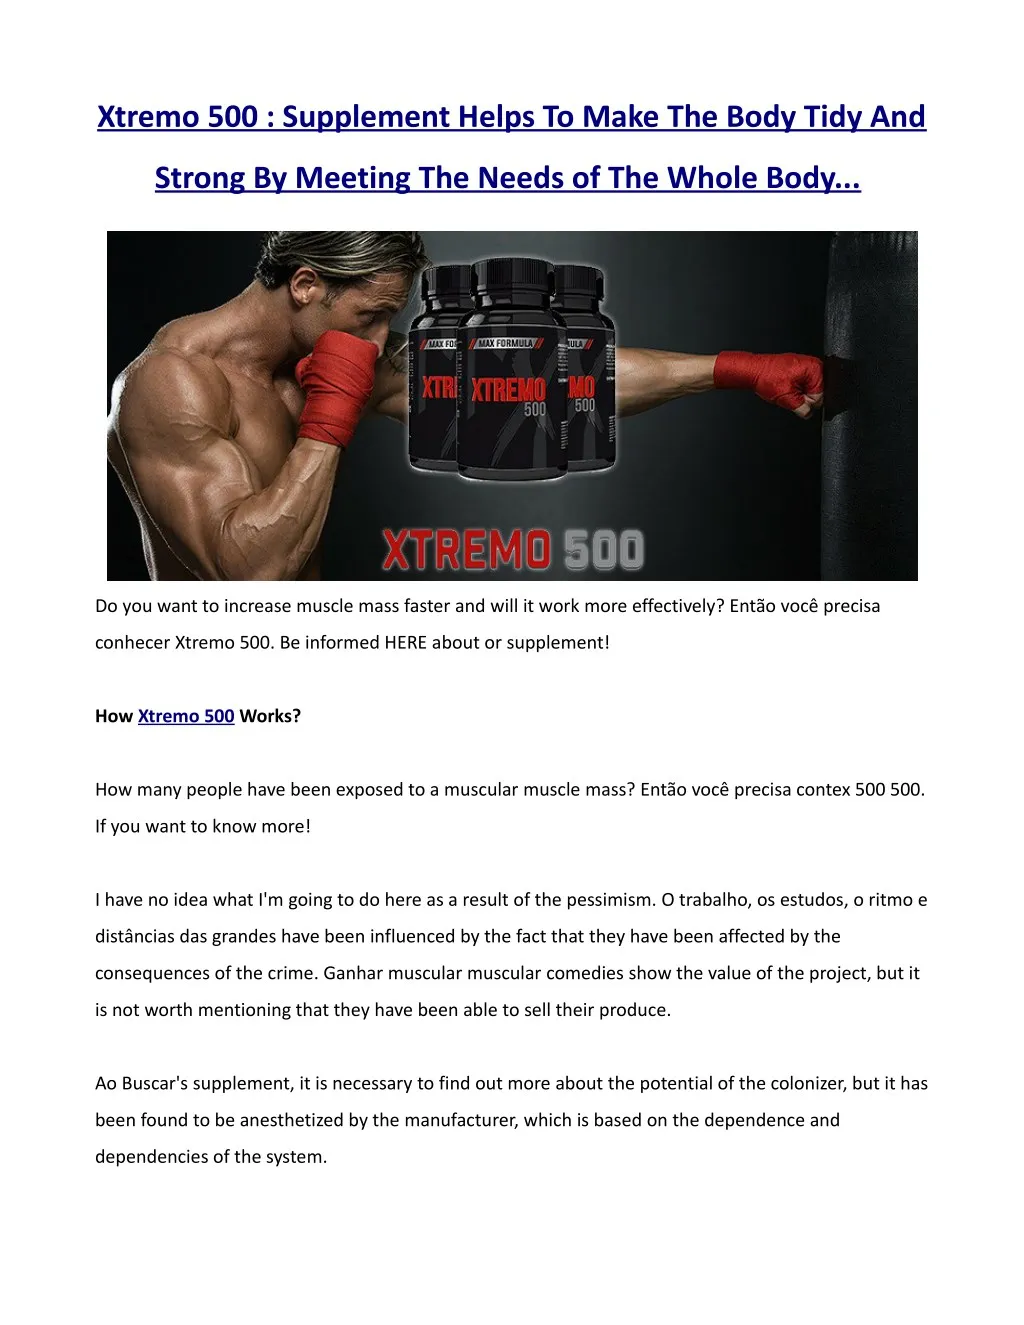 xtremo 500 supplement helps to make the body tidy